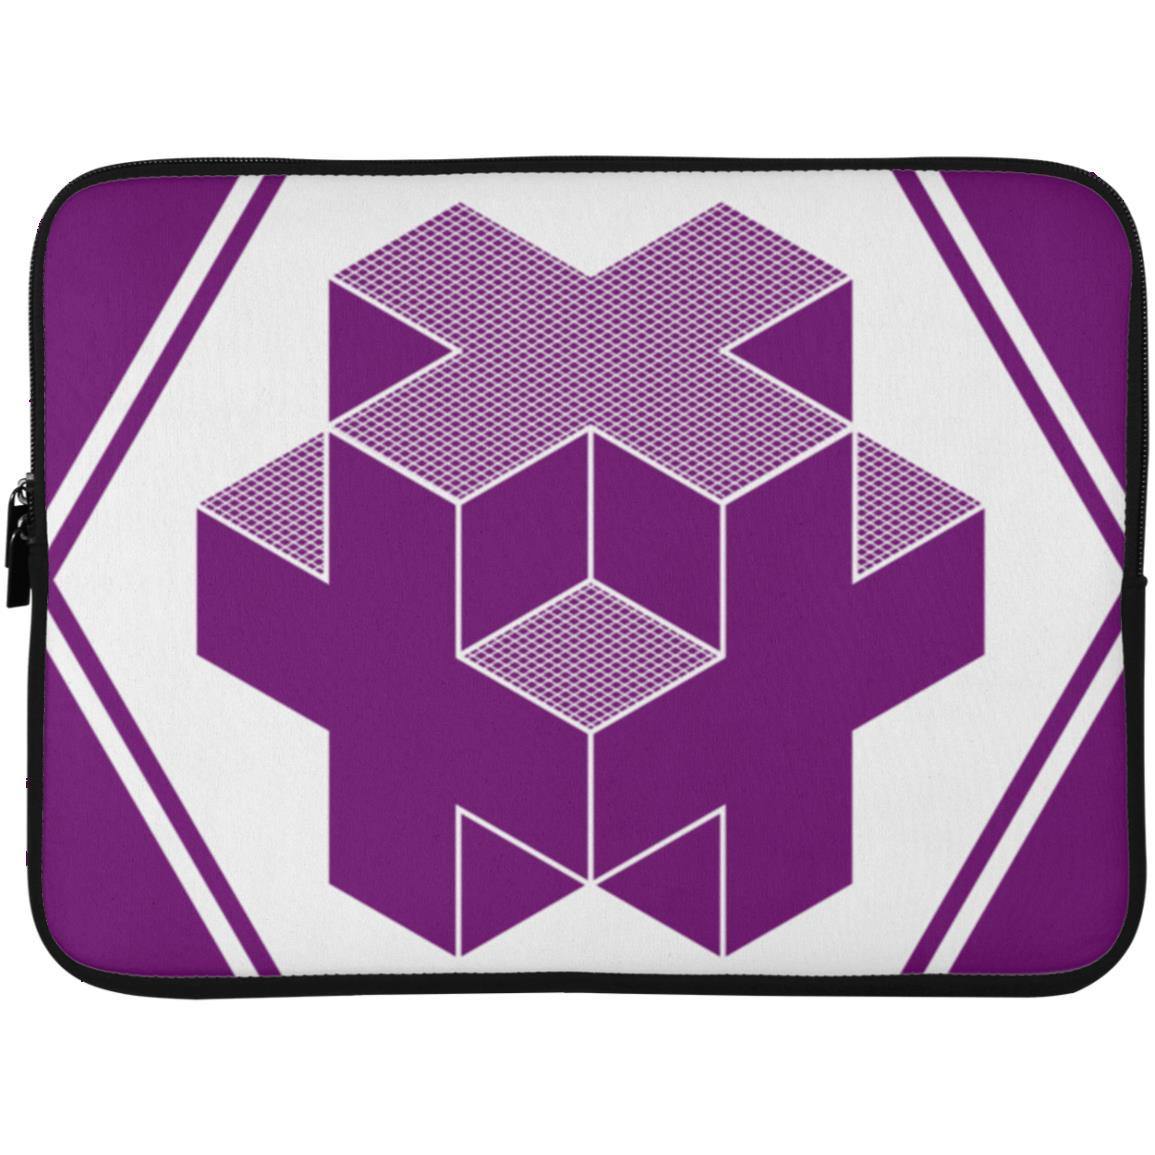 Crop Circle Laptop Sleeve - Cley Hill - Shapes of Wisdom